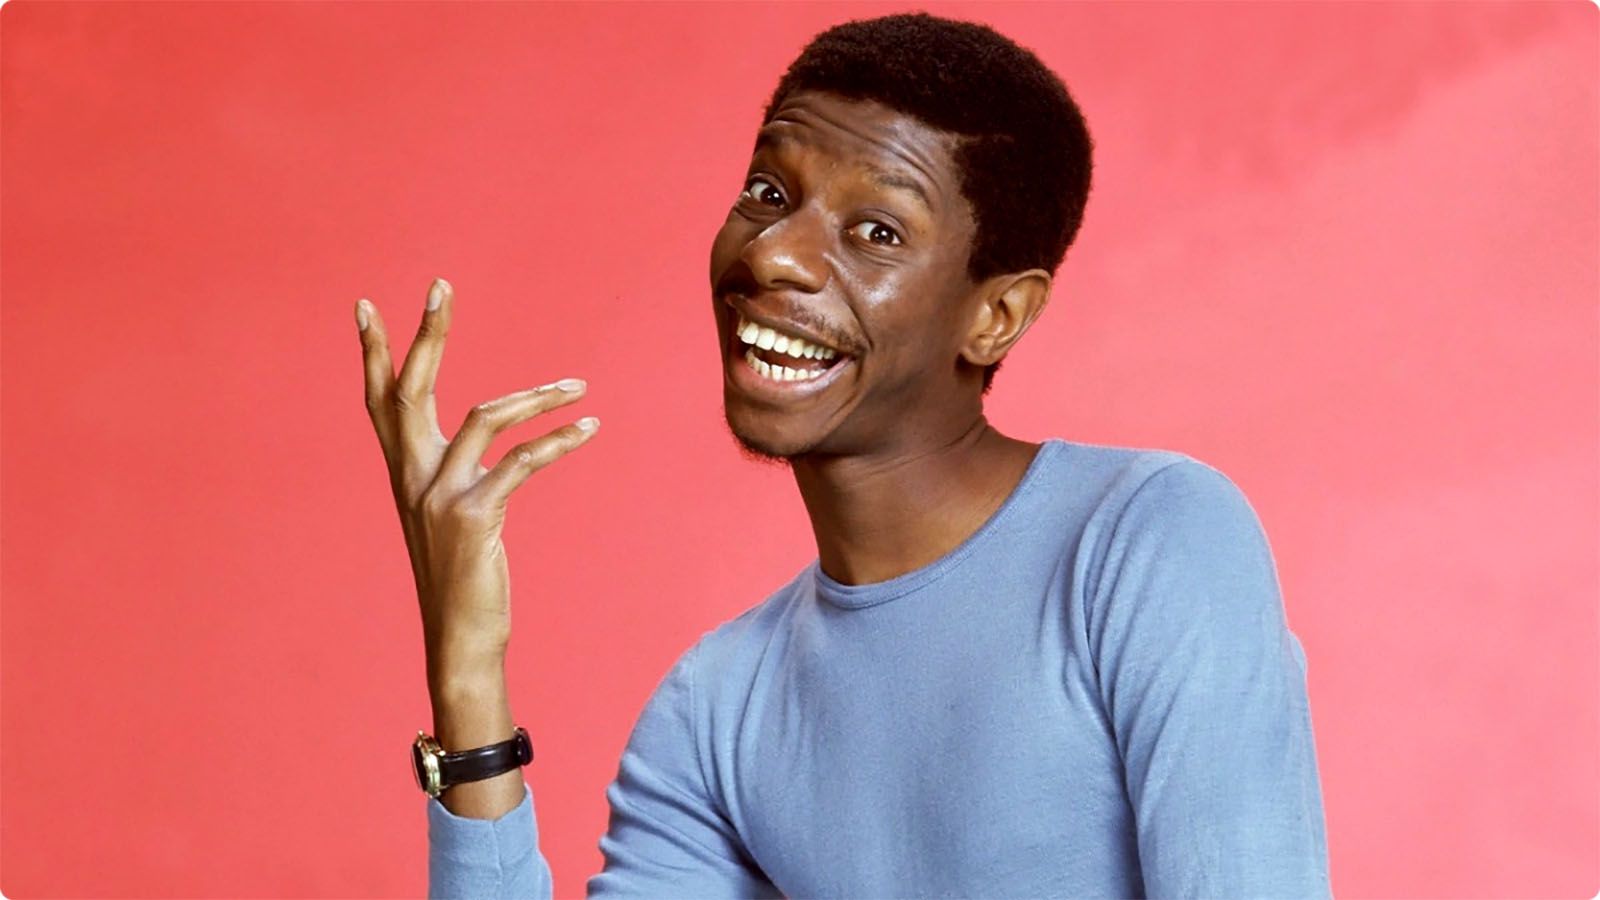 Jimmie JJ Walker will join Michael Winslow at the Eclectic Room in December.